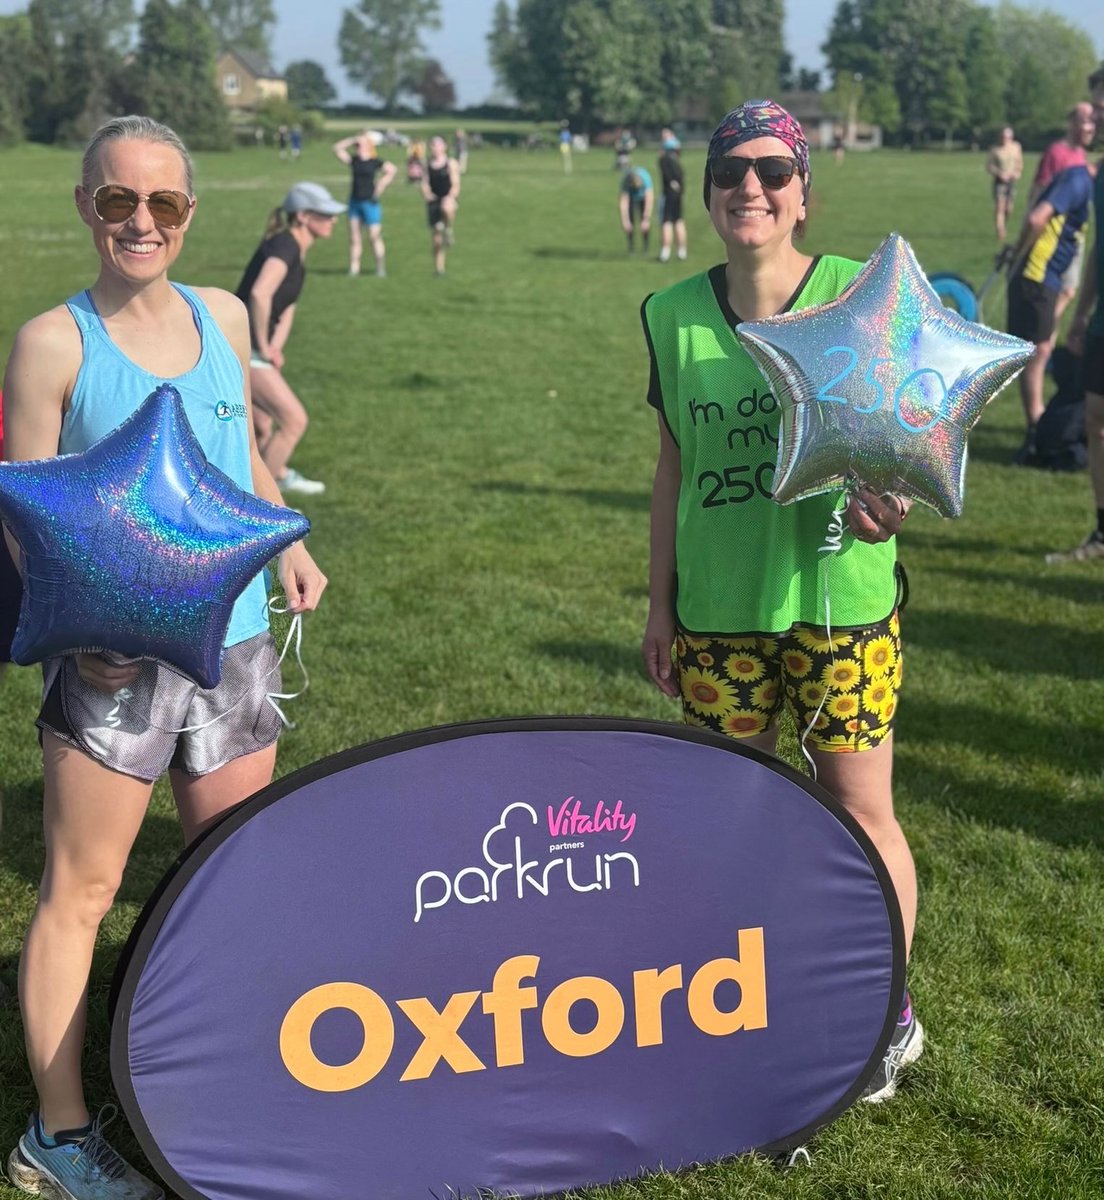 'As nurses, the thing we're most proud of is the difference we make to patients.' Ward sister Lucy and Matron Heather from @OUHospitals celebrated International Nurses Day with @parkrunUK today. Lucy completed her 150th parkrun and Heather completed her 250th. 👏 #IND2024